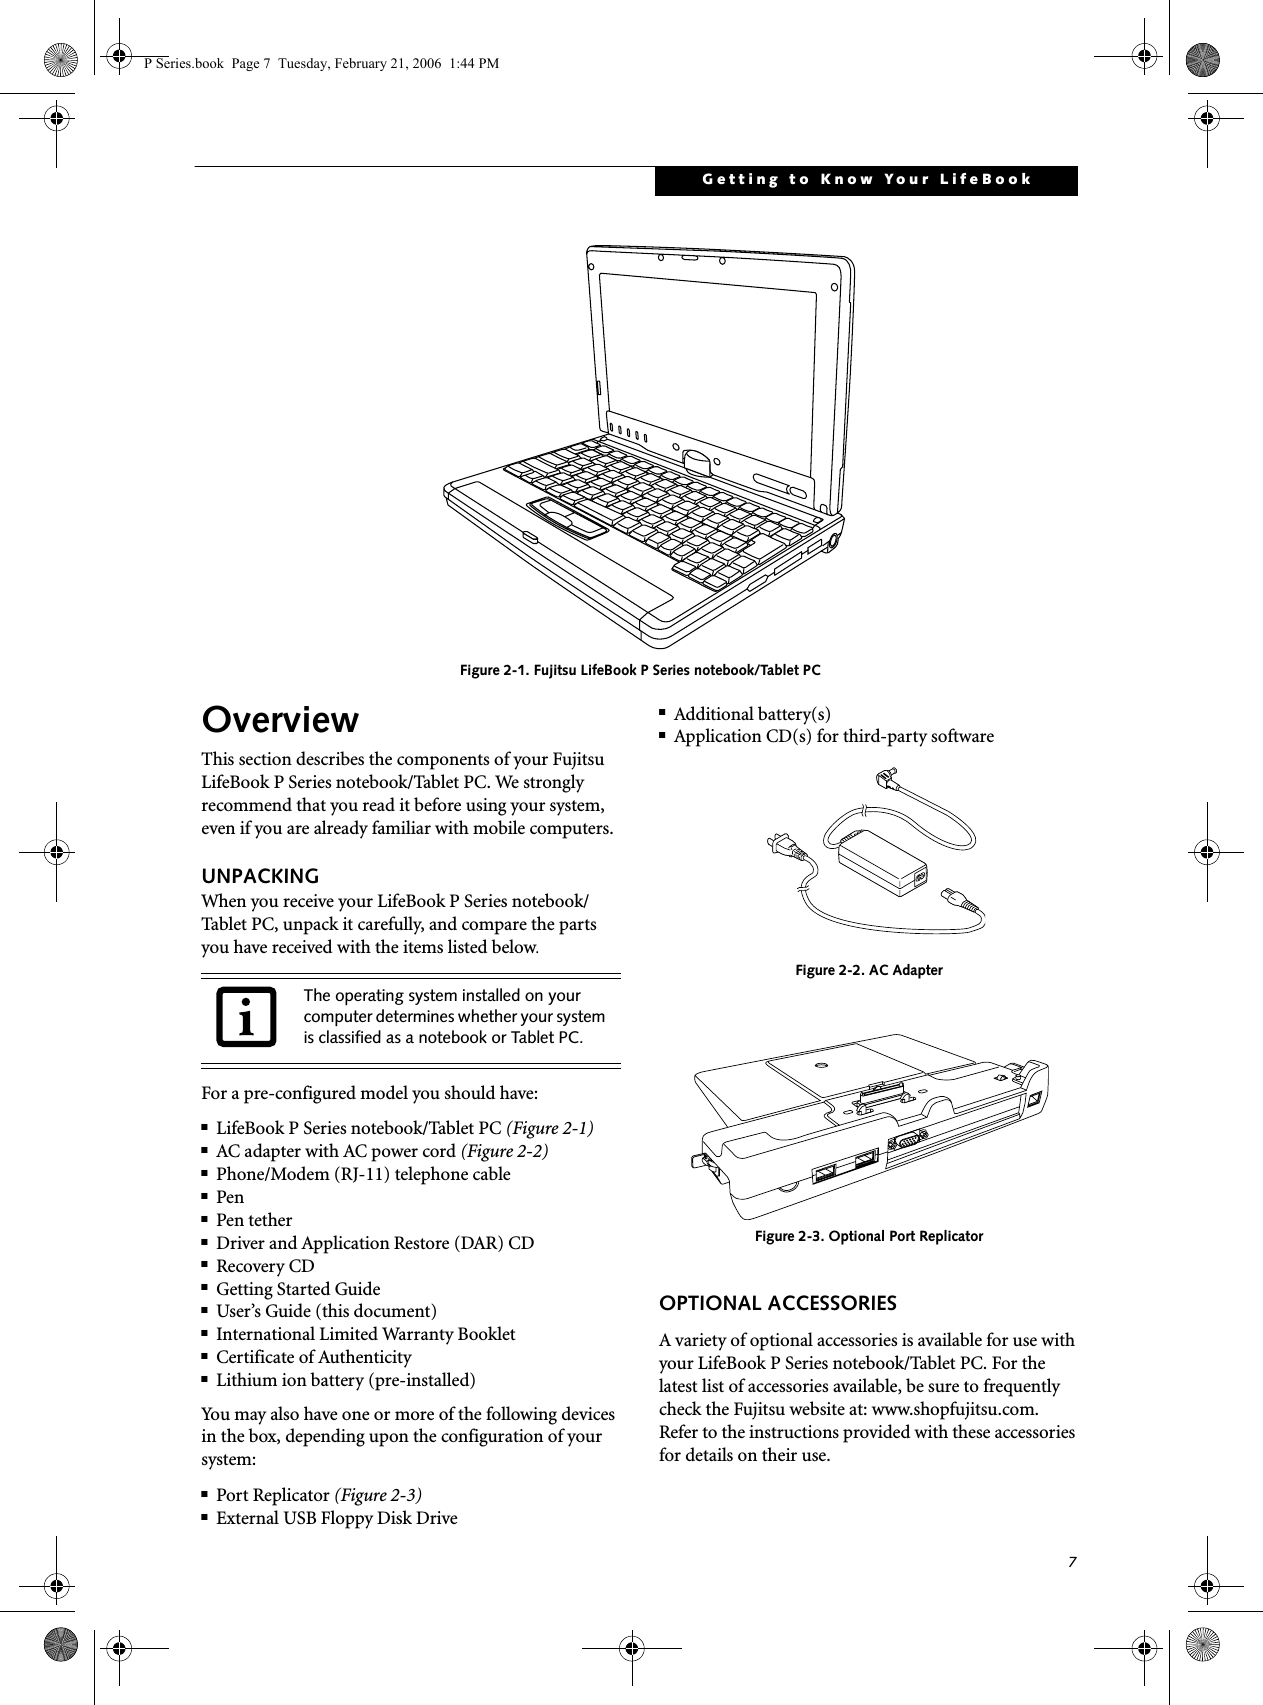 7Getting to Know Your LifeBook Figure 2-1. Fujitsu LifeBook P Series notebook/Tablet PC OverviewThis section describes the components of your Fujitsu LifeBook P Series notebook/Tablet PC. We strongly recommend that you read it before using your system, even if you are already familiar with mobile computers.UNPACKINGWhen you receive your LifeBook P Series notebook/Tablet PC, unpack it carefully, and compare the parts you have received with the items listed below.For a pre-configured model you should have:■LifeBook P Series notebook/Tablet PC (Figure 2-1)■AC adapter with AC power cord (Figure 2-2)■Phone/Modem (RJ-11) telephone cable■Pen■Pen tether■Driver and Application Restore (DAR) CD■Recovery CD■Getting Started Guide■User’s Guide (this document)■International Limited Warranty Booklet■Certificate of Authenticity■Lithium ion battery (pre-installed)You may also have one or more of the following devices in the box, depending upon the configuration of your system:■Port Replicator (Figure 2-3)■External USB Floppy Disk Drive■Additional battery(s)■Application CD(s) for third-party software Figure 2-2. AC AdapterFigure 2-3. Optional Port ReplicatorOPTIONAL ACCESSORIESA variety of optional accessories is available for use with your LifeBook P Series notebook/Tablet PC. For the latest list of accessories available, be sure to frequently check the Fujitsu website at: www.shopfujitsu.com. Refer to the instructions provided with these accessories for details on their use.The operating system installed on your computer determines whether your system is classified as a notebook or Tablet PC.P Series.book  Page 7  Tuesday, February 21, 2006  1:44 PM